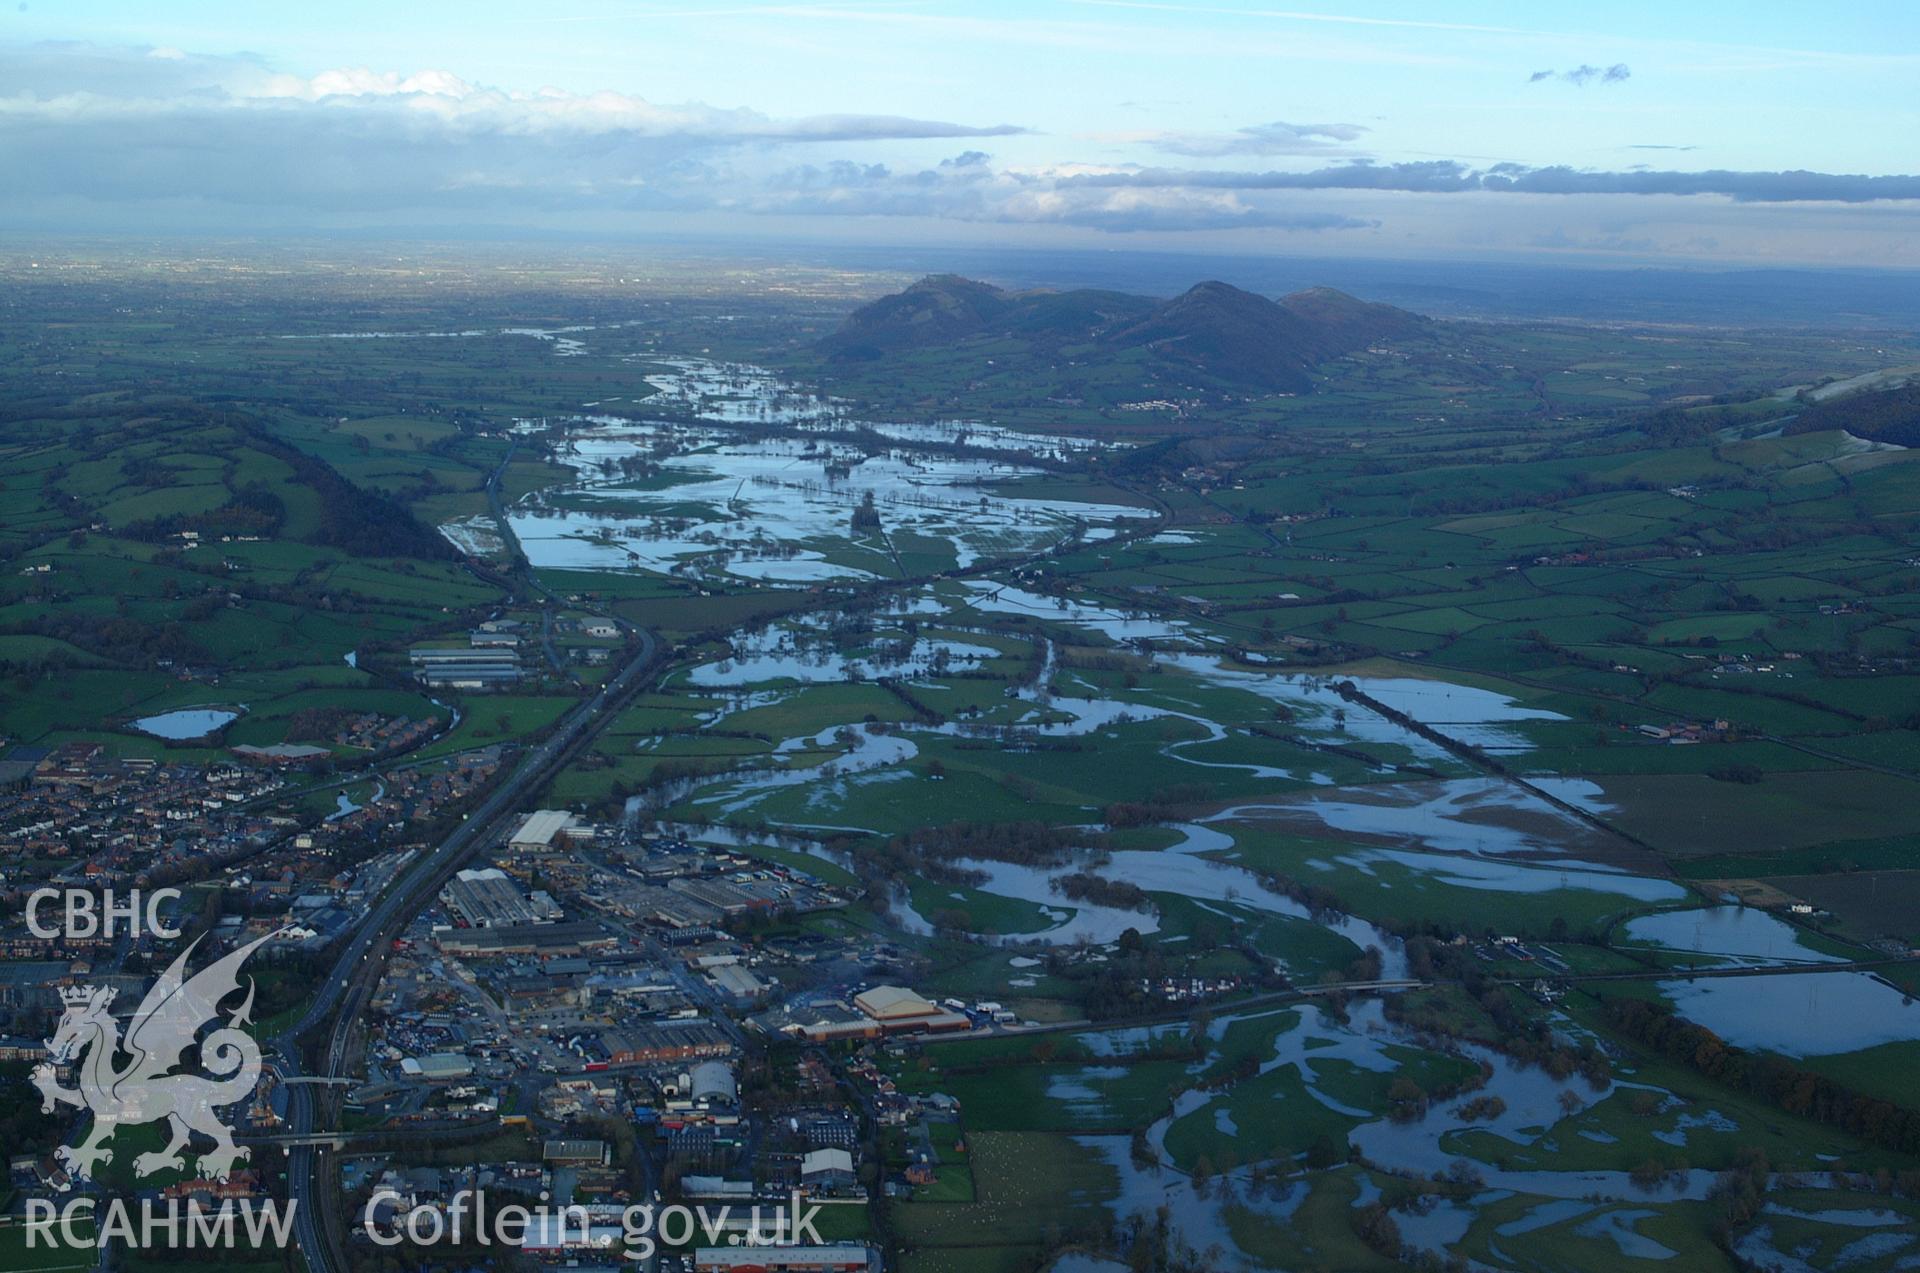 RCAHMW colour oblique aerial photograph of Welshpool. A wide landscape view looking north-east to the Breiddin with the Severn in flood. Taken on 19 November 2004 by Toby Driver